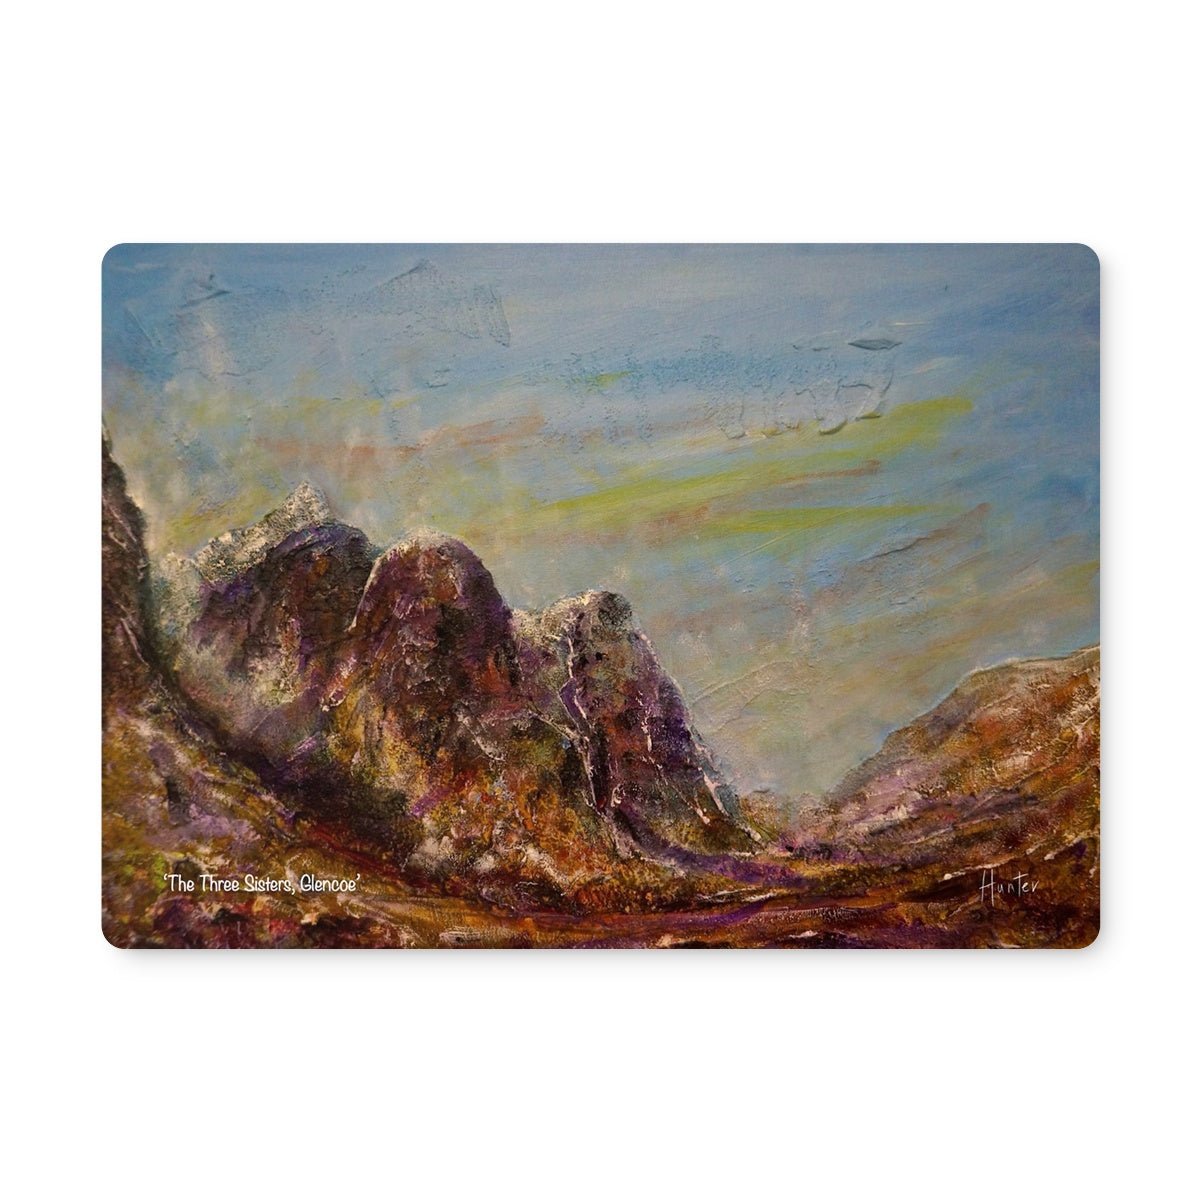 Three Sisters Glencoe Art Gifts Placemat-Placemats-Glencoe Art Gallery-6 Placemats-Paintings, Prints, Homeware, Art Gifts From Scotland By Scottish Artist Kevin Hunter